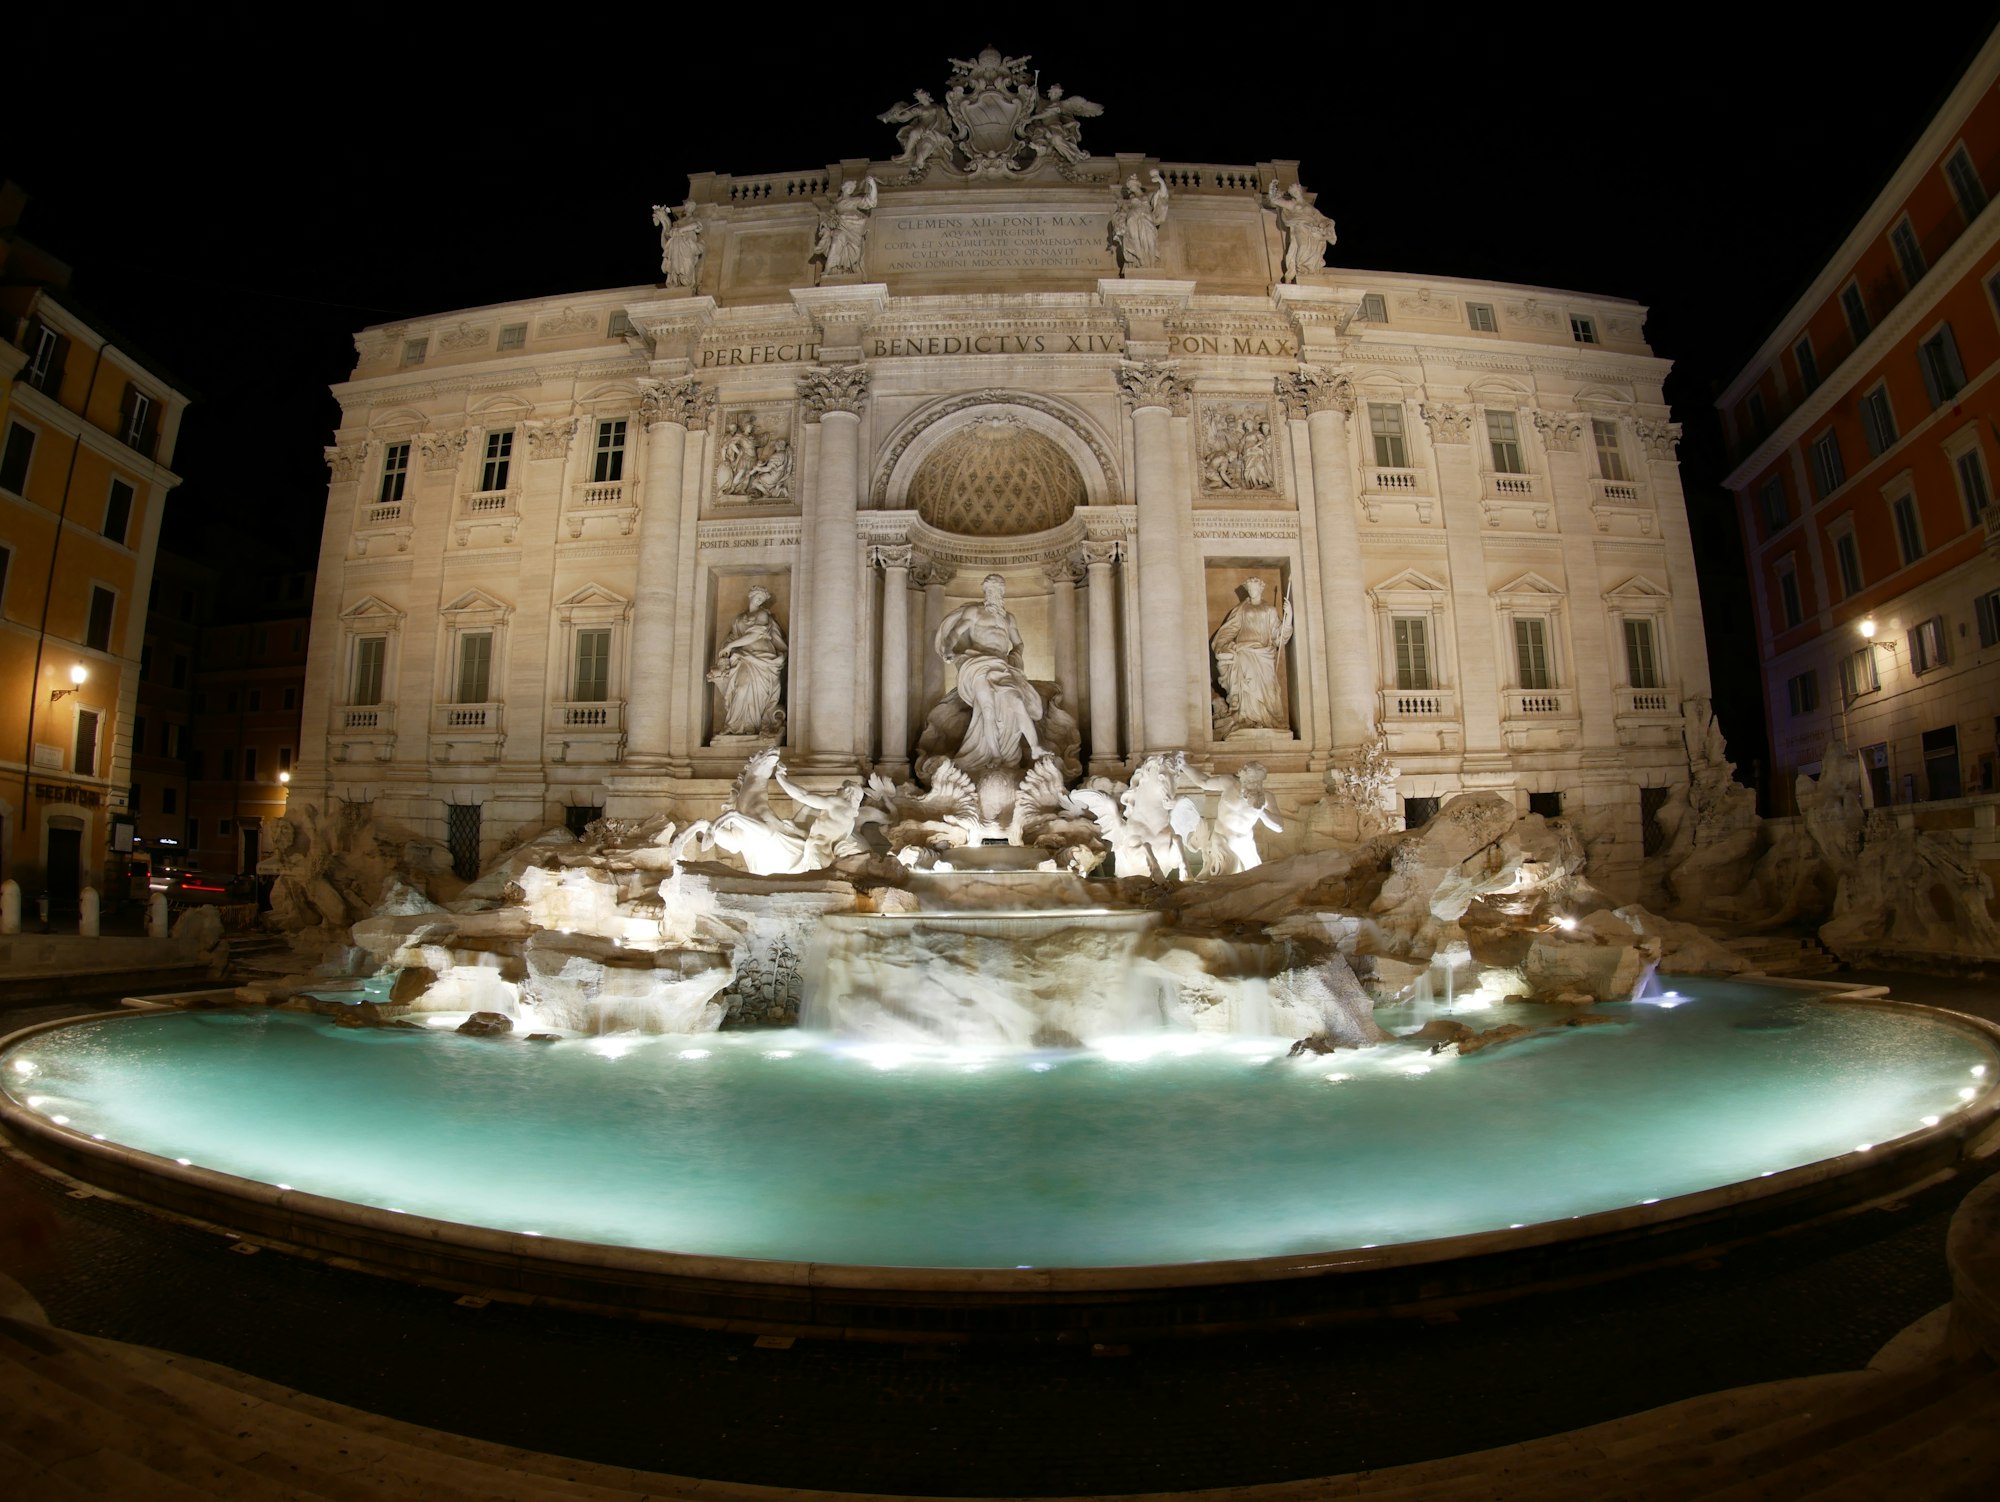 The entire Fontana di Trevi, close to the 10 PM curfew due to COVID-19, so there were particularly few people here. With an 8mm lens, I could get the entire fountain!